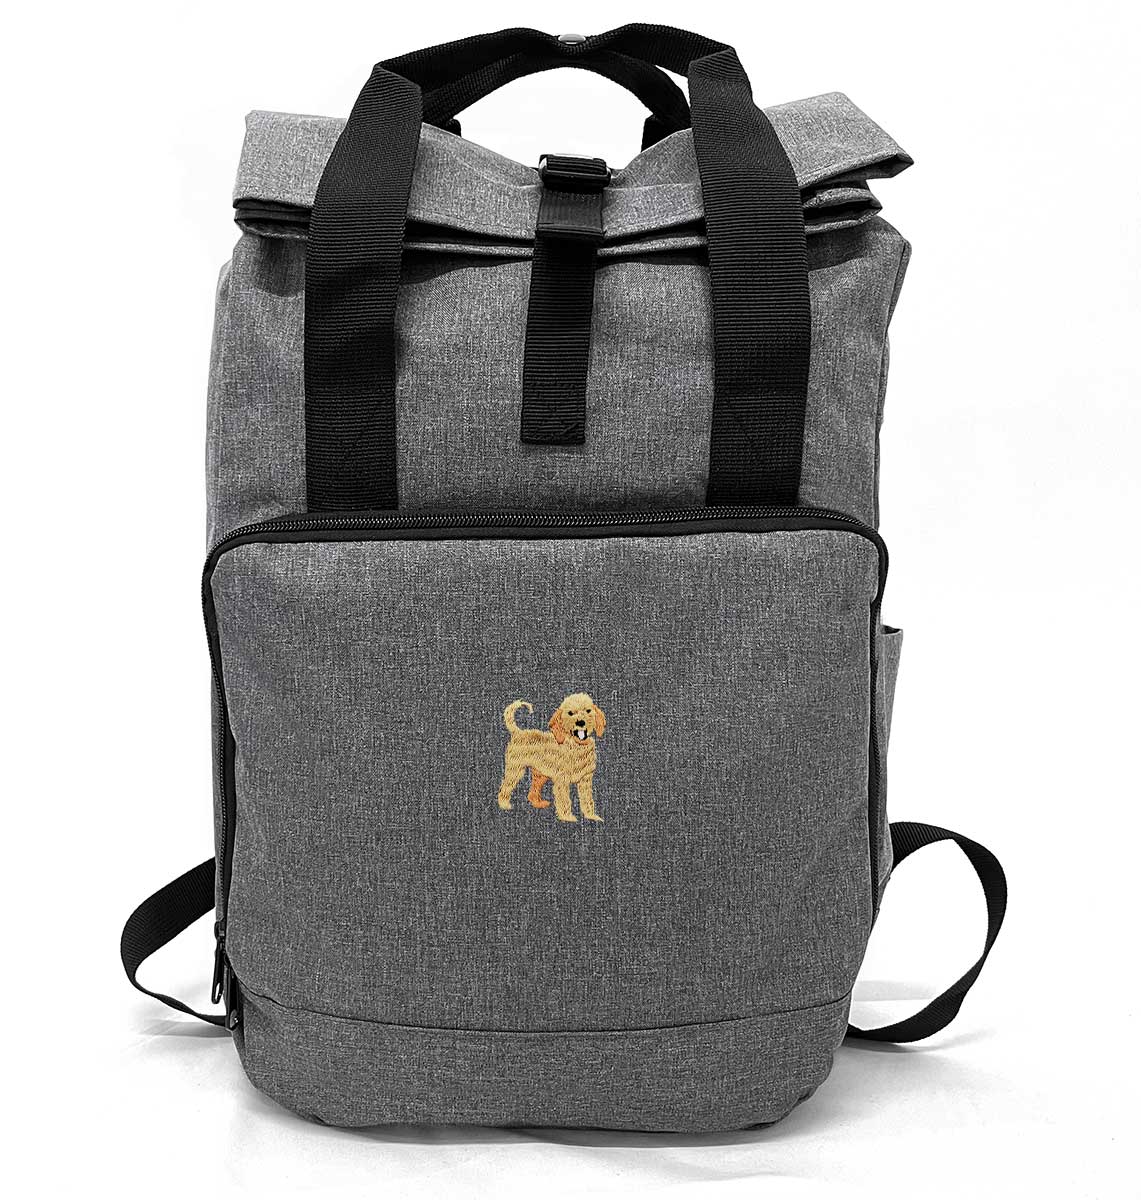 Labradoodle Roll-top Laptop Recycled Backpack - Blue Panda